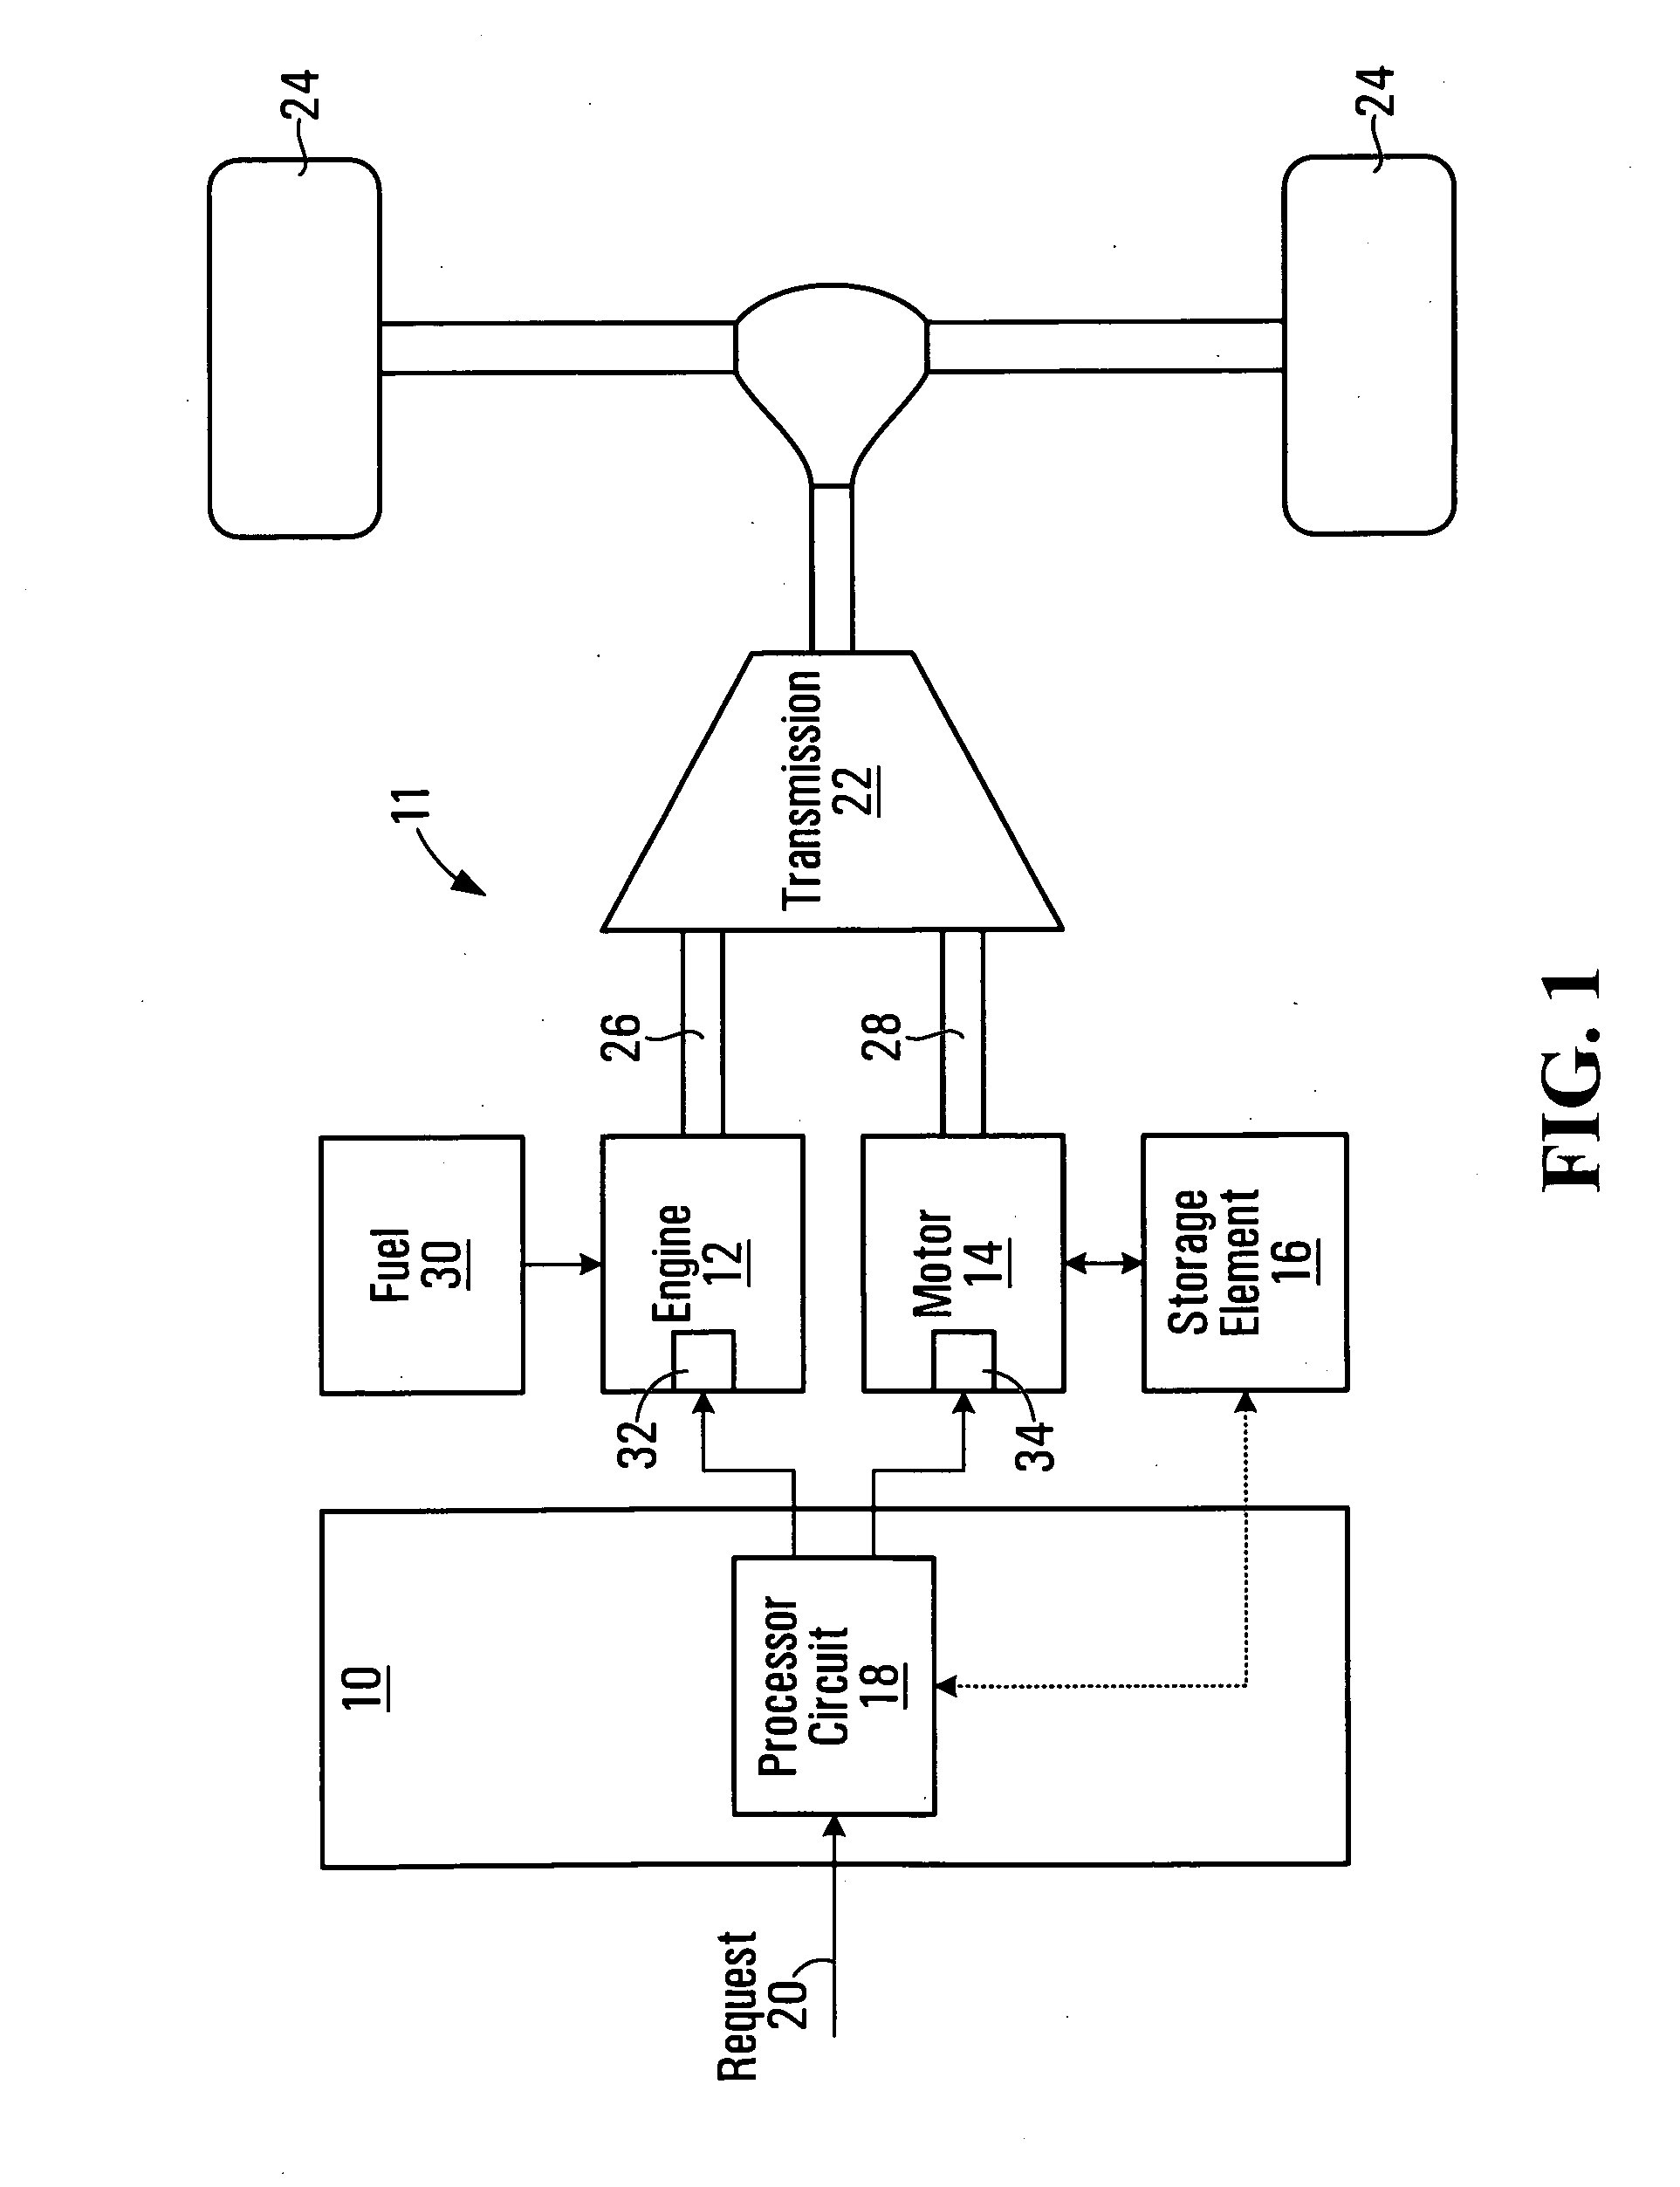 Method, apparatus, signals, and medium for managing power in a hybrid vehicle